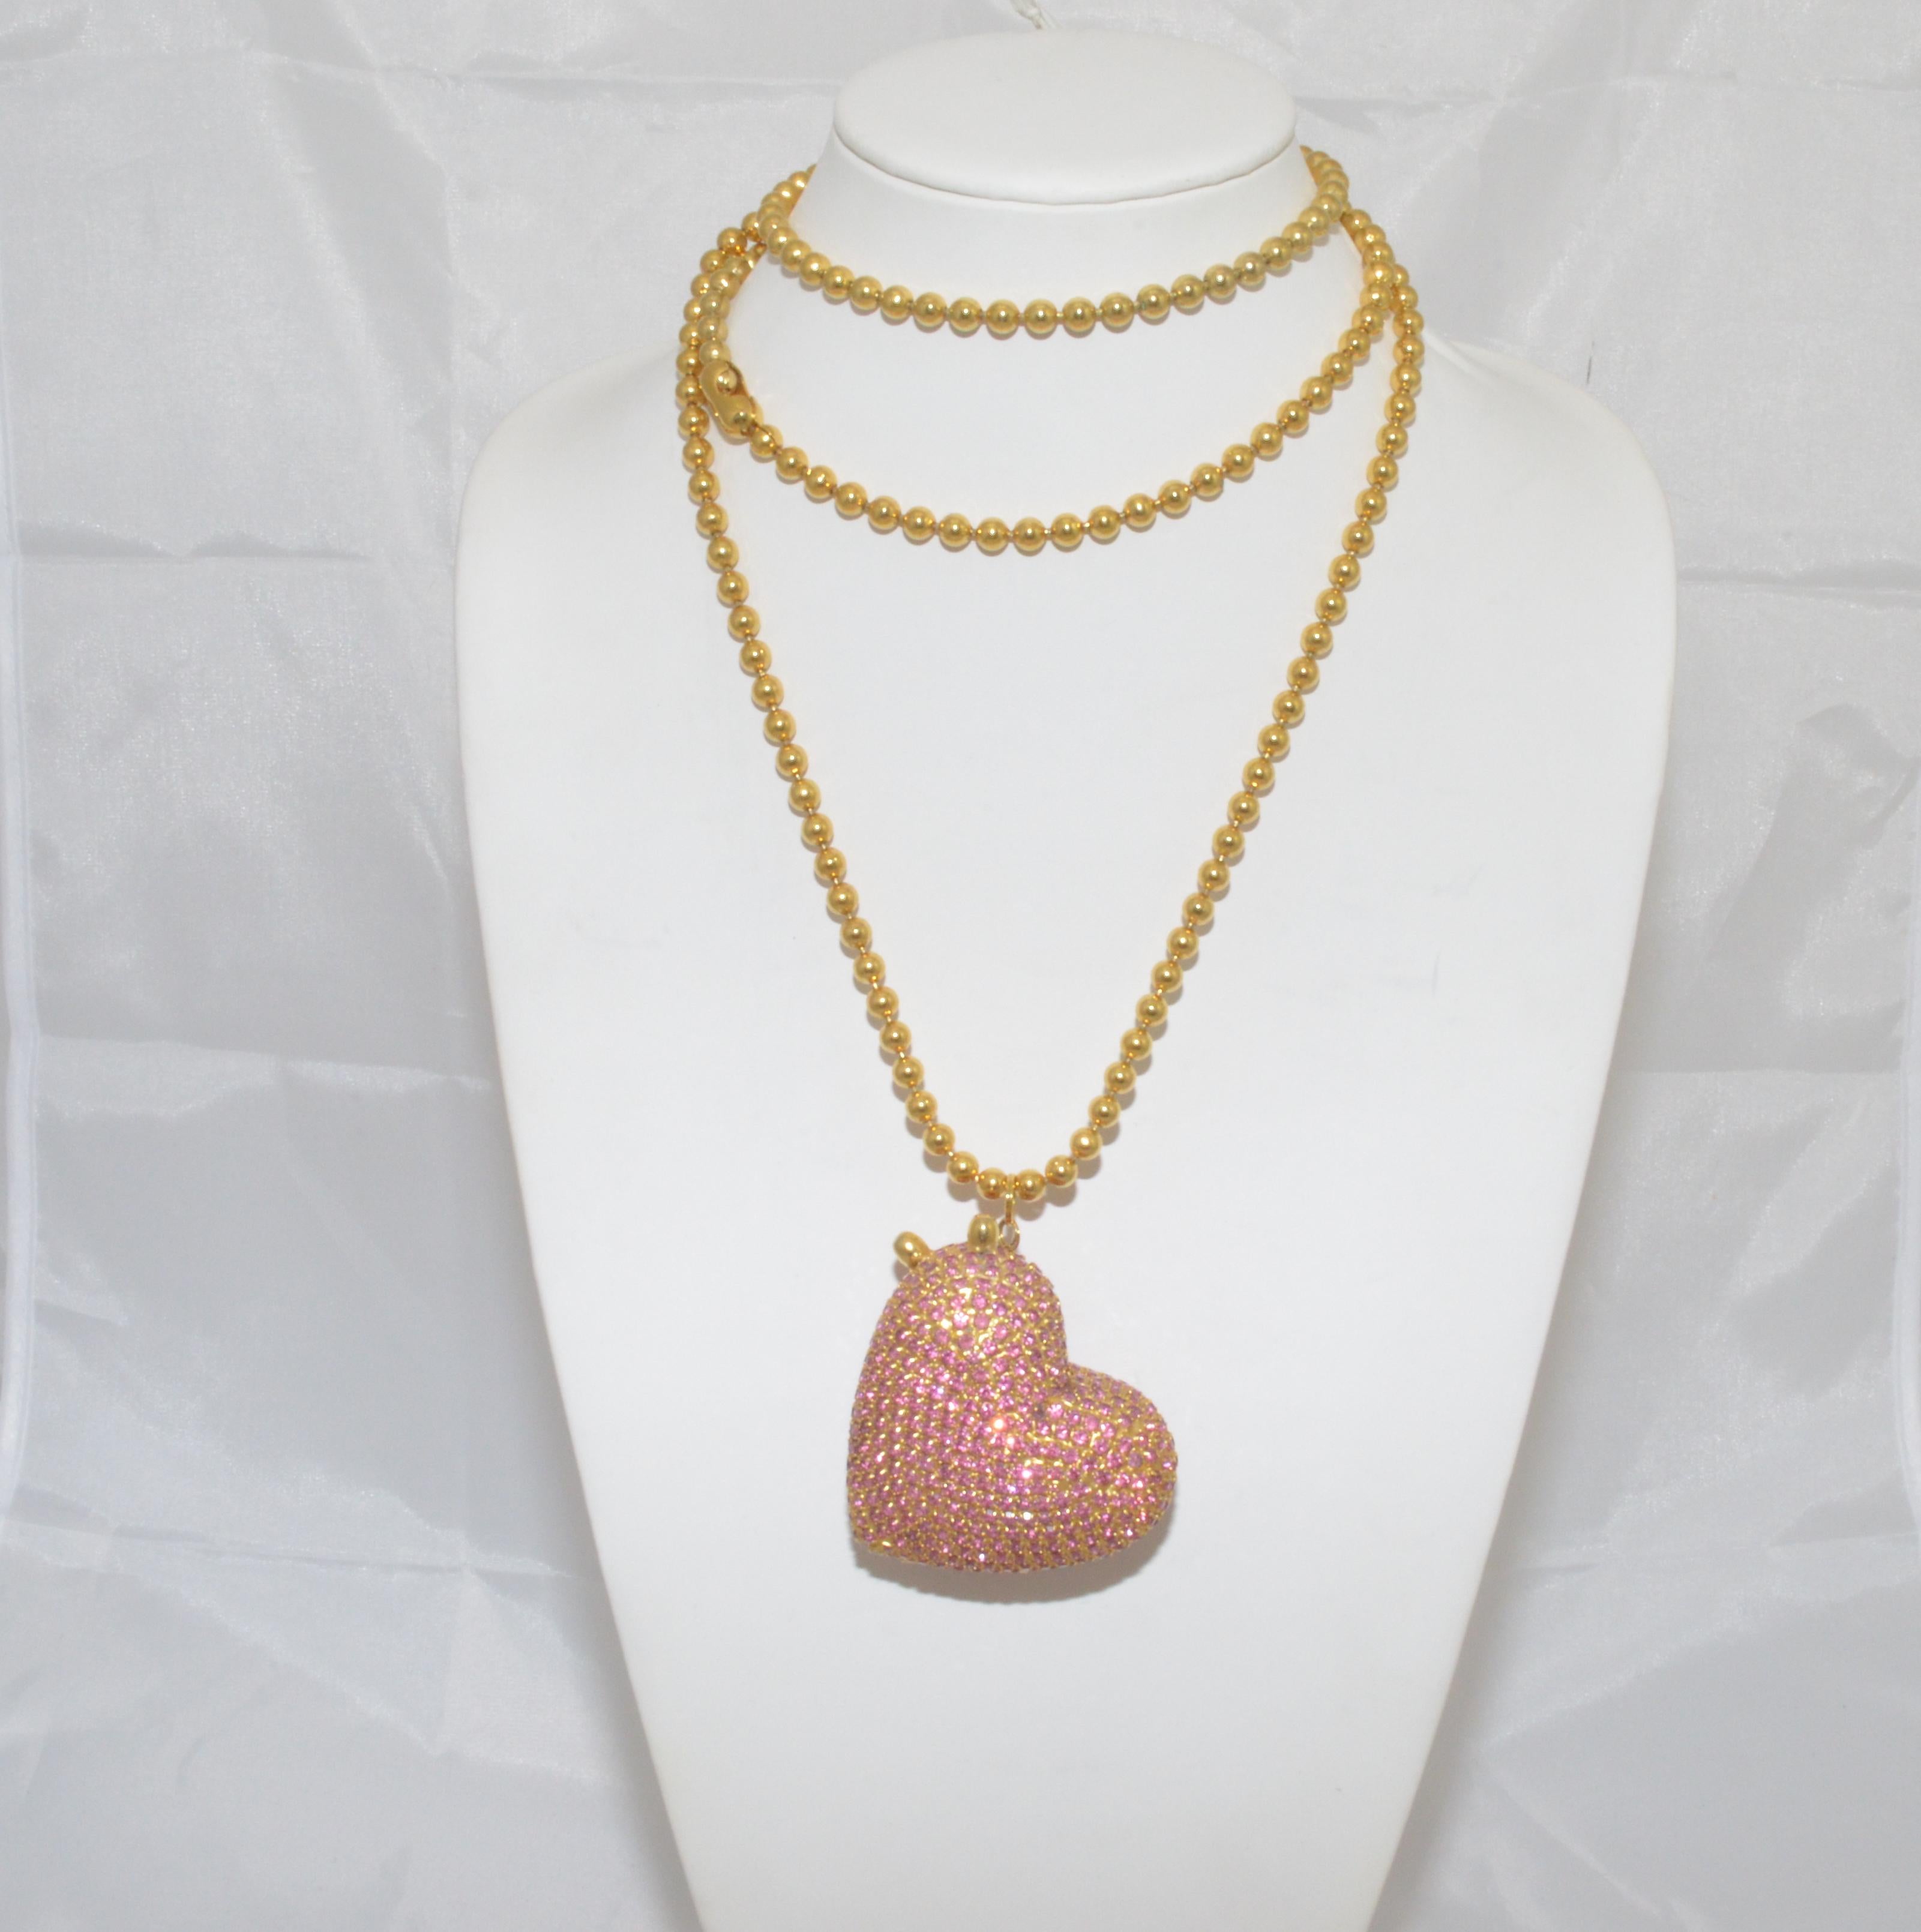 Dorothy Bauer Vintage Chain Necklace with Heart Locket Pendant -- Vintage necklace has a gold-tone bead chain with a large rhinestone-encrusted heart locket as a pendant. Marked ''pat 2007''

Length 50''